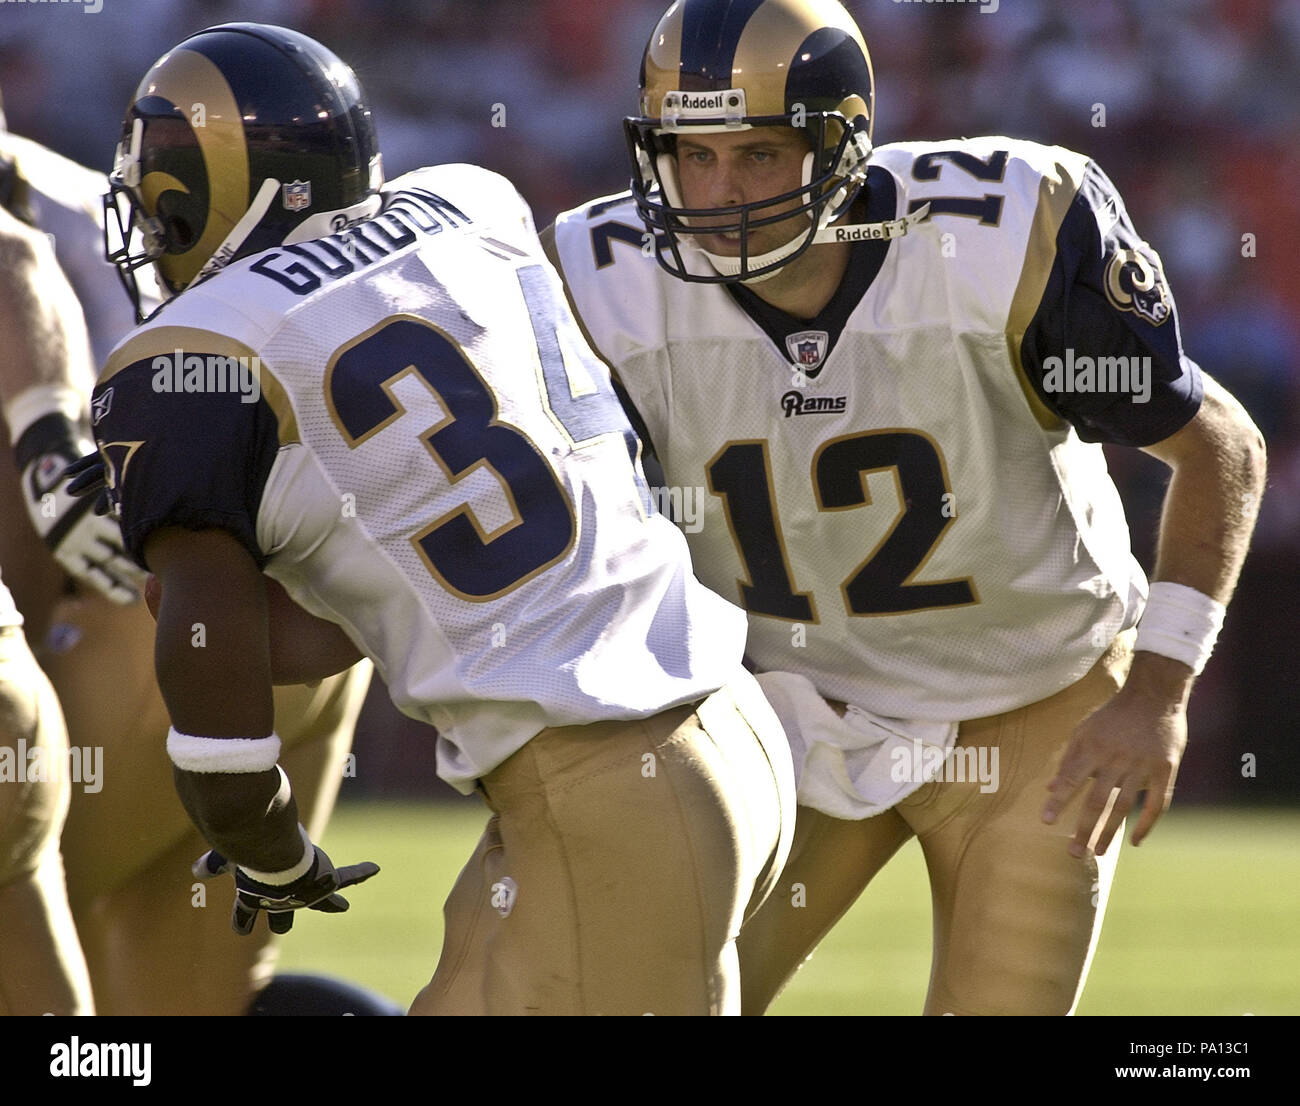 rams old colors